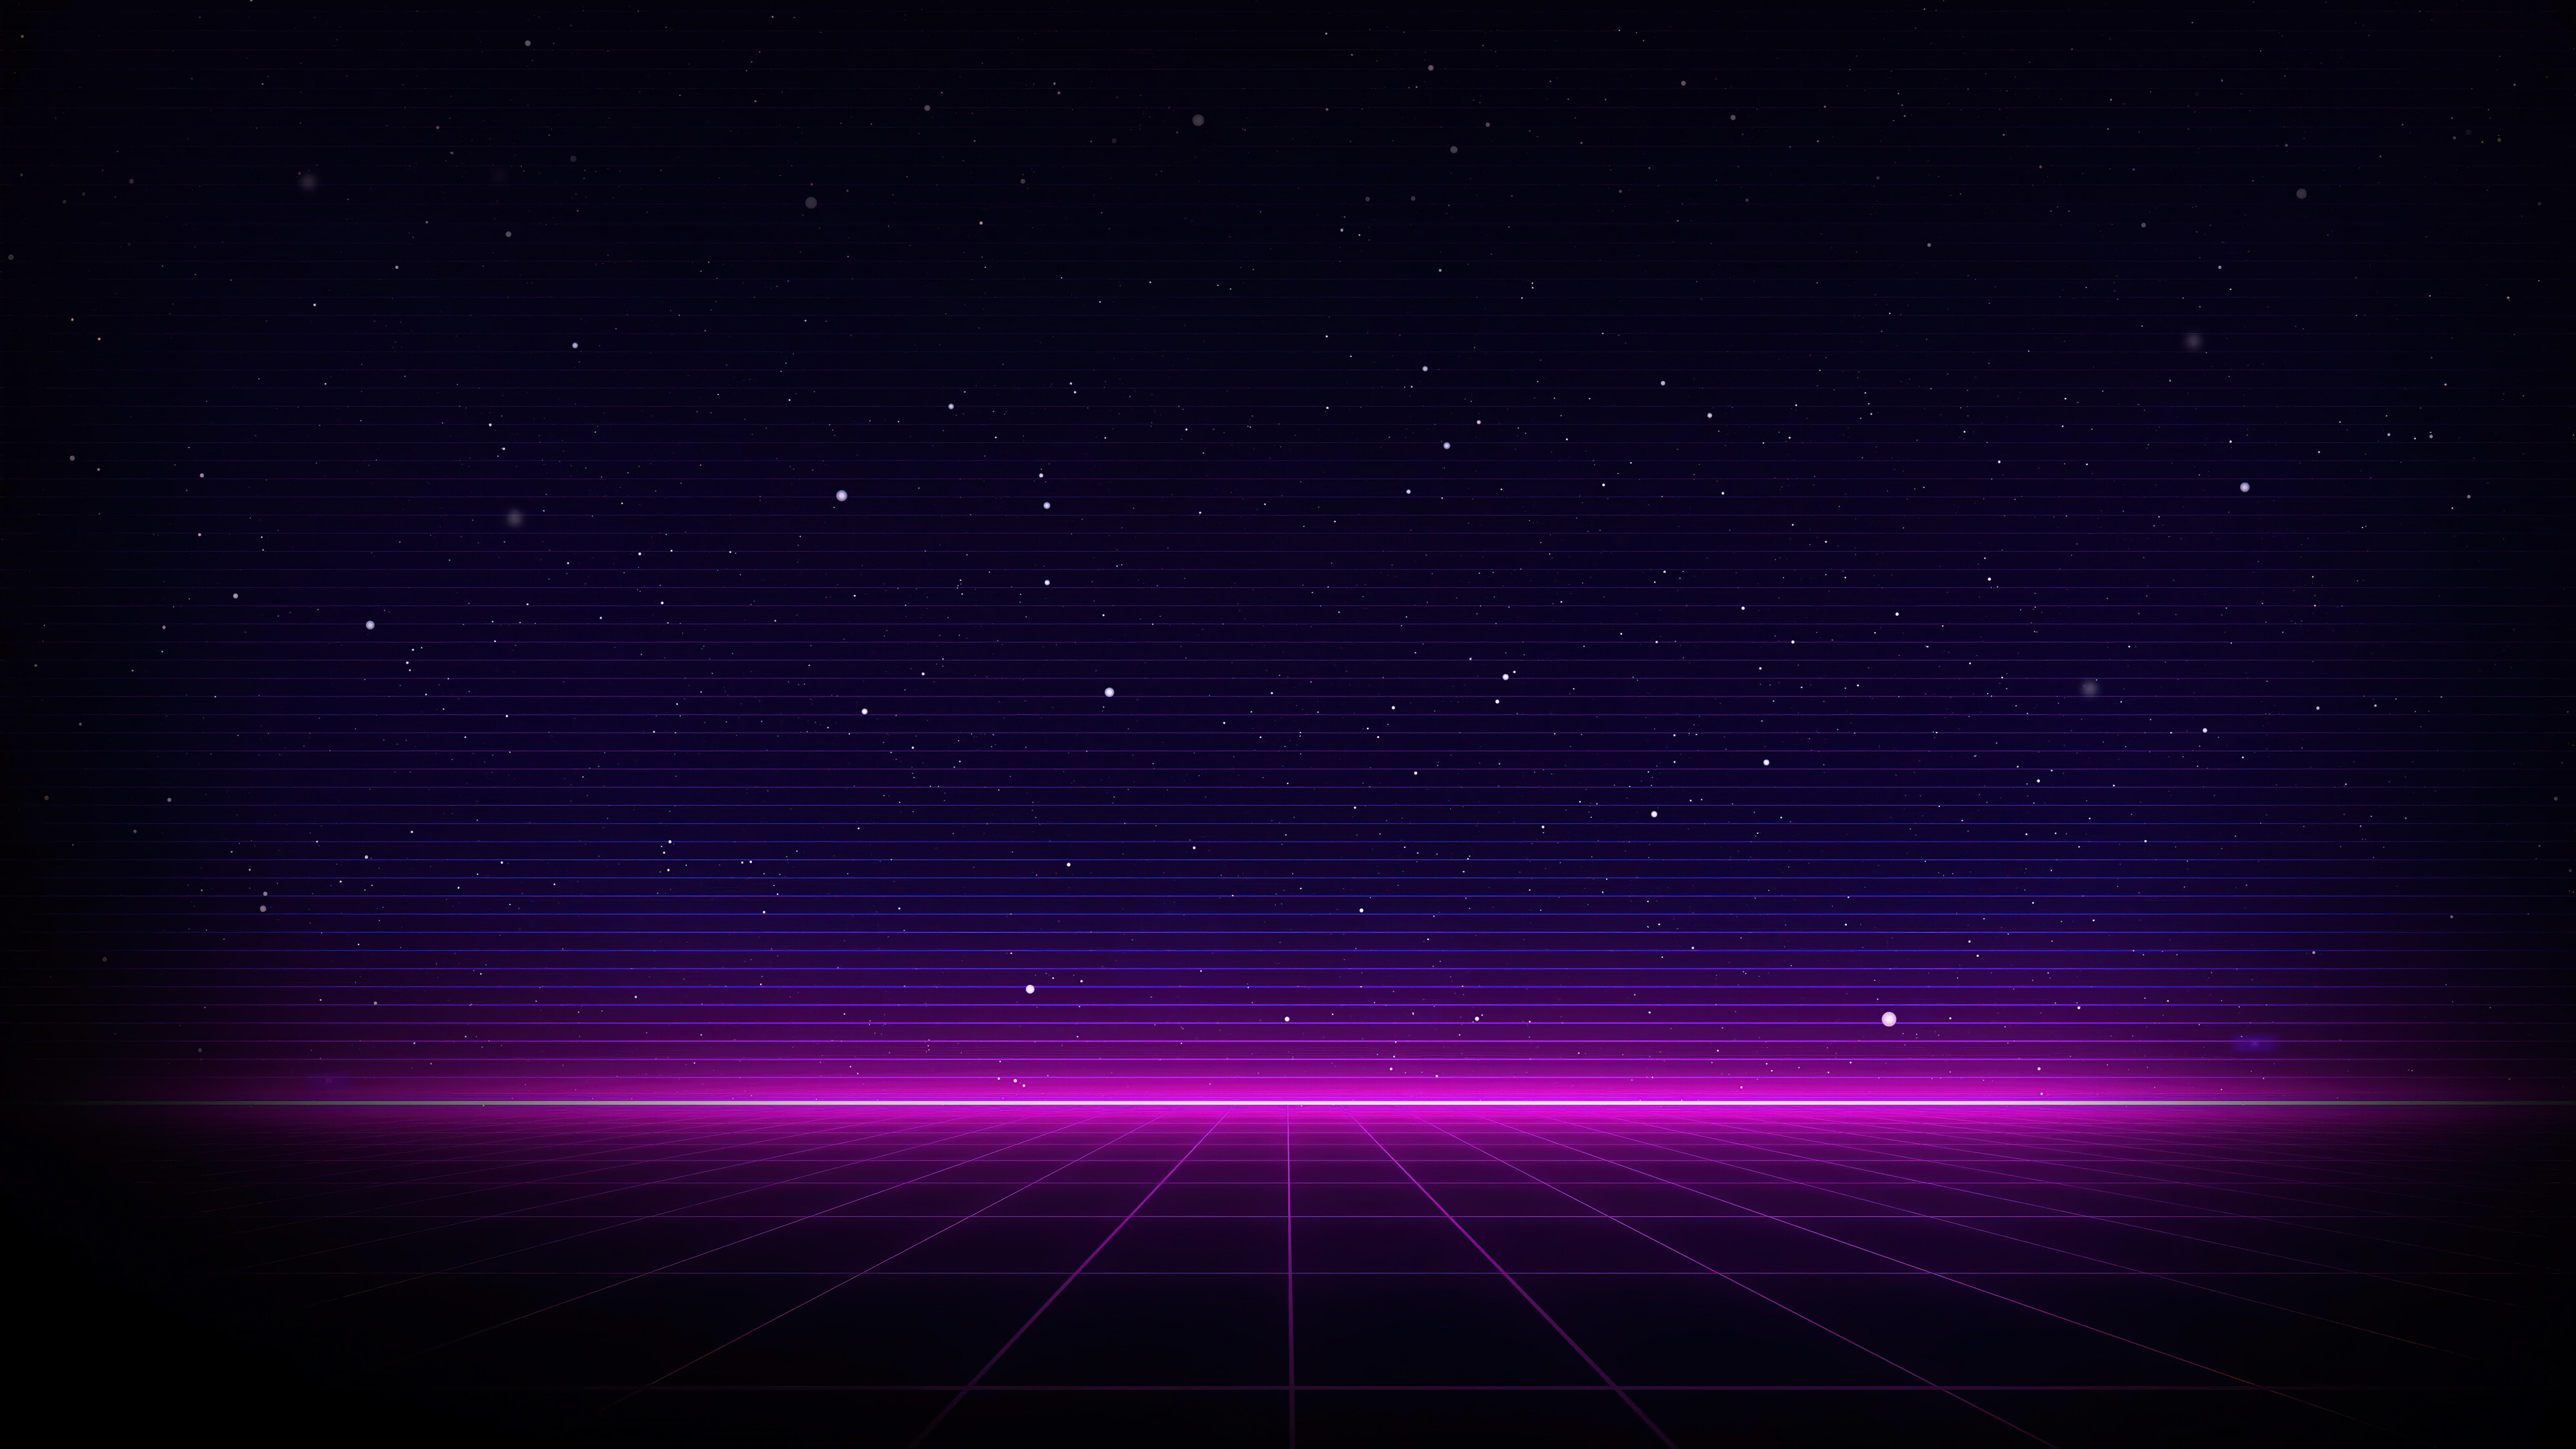 Glow in the Dark: Neon horizon, Shimmering astronomical object, Cosmic, Abstract. 3840x2160 4K Wallpaper.